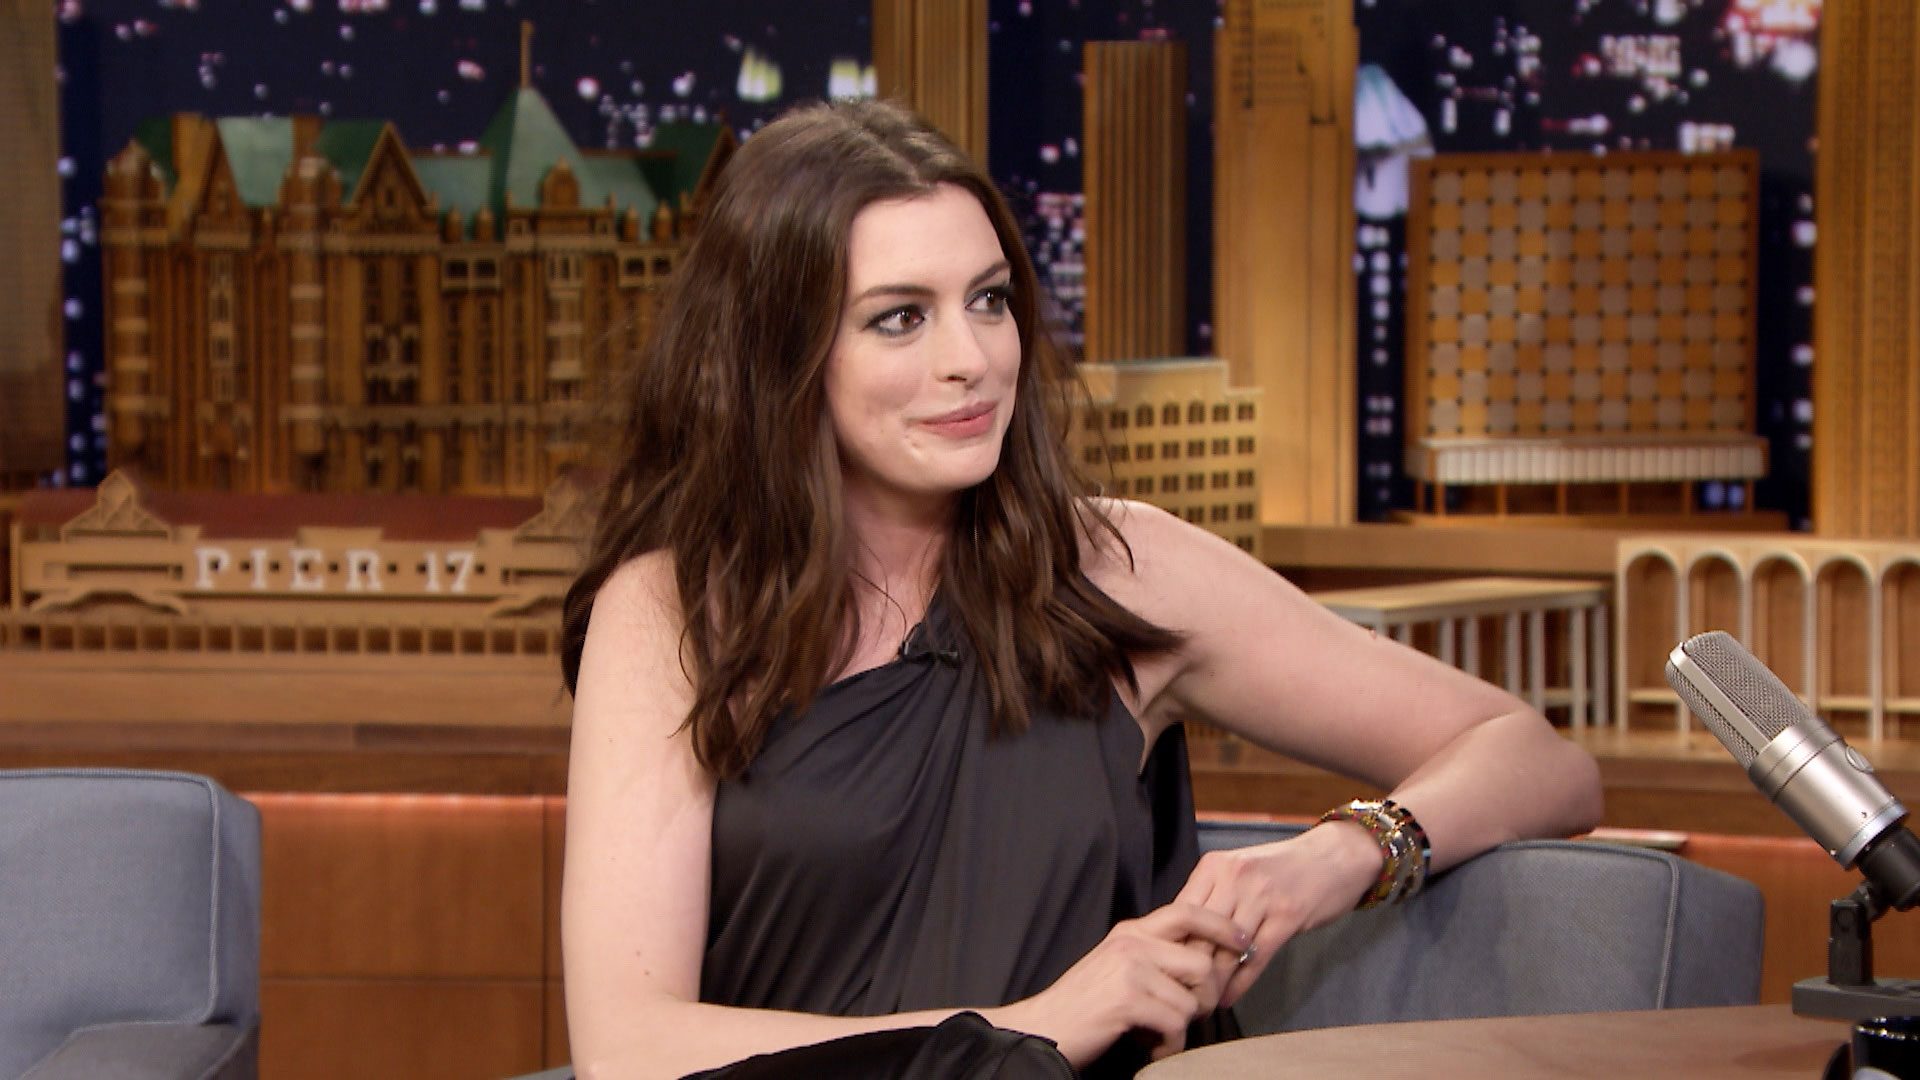 Watch The Tonight Show Starring Jimmy Fallon Episode: April 17 - Anne ...